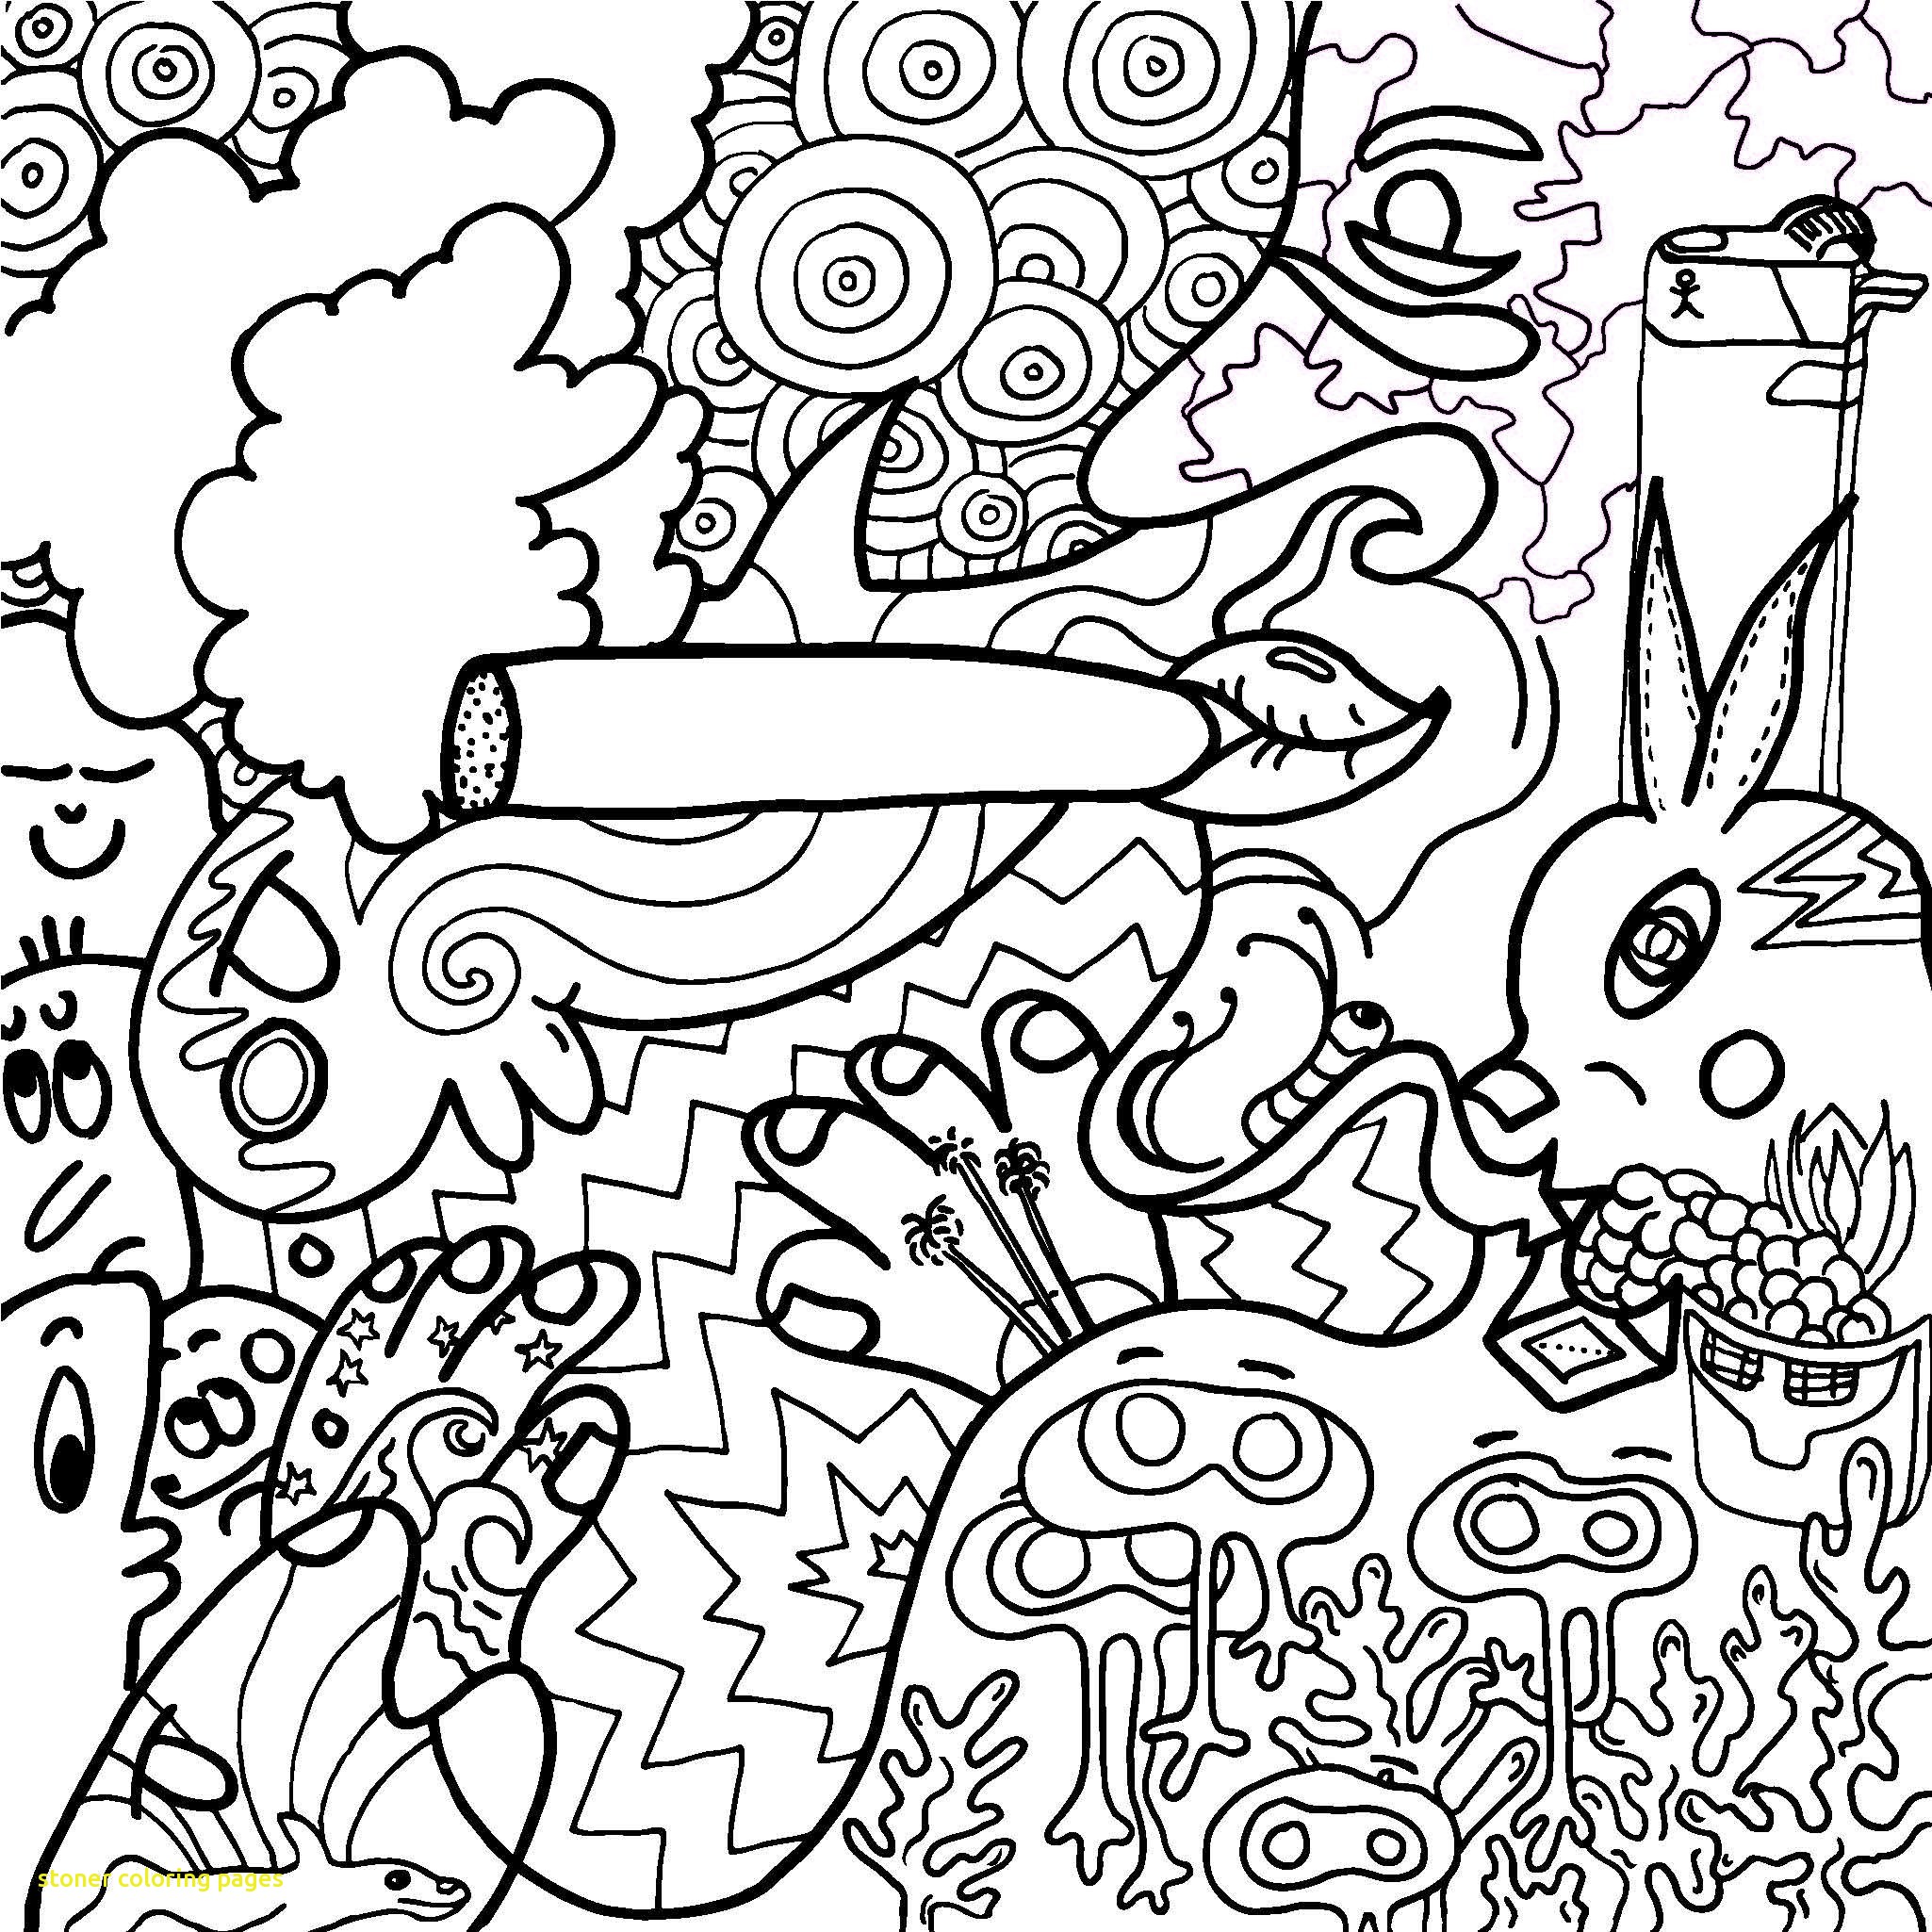 420 Coloring Pages at GetDrawings Free download